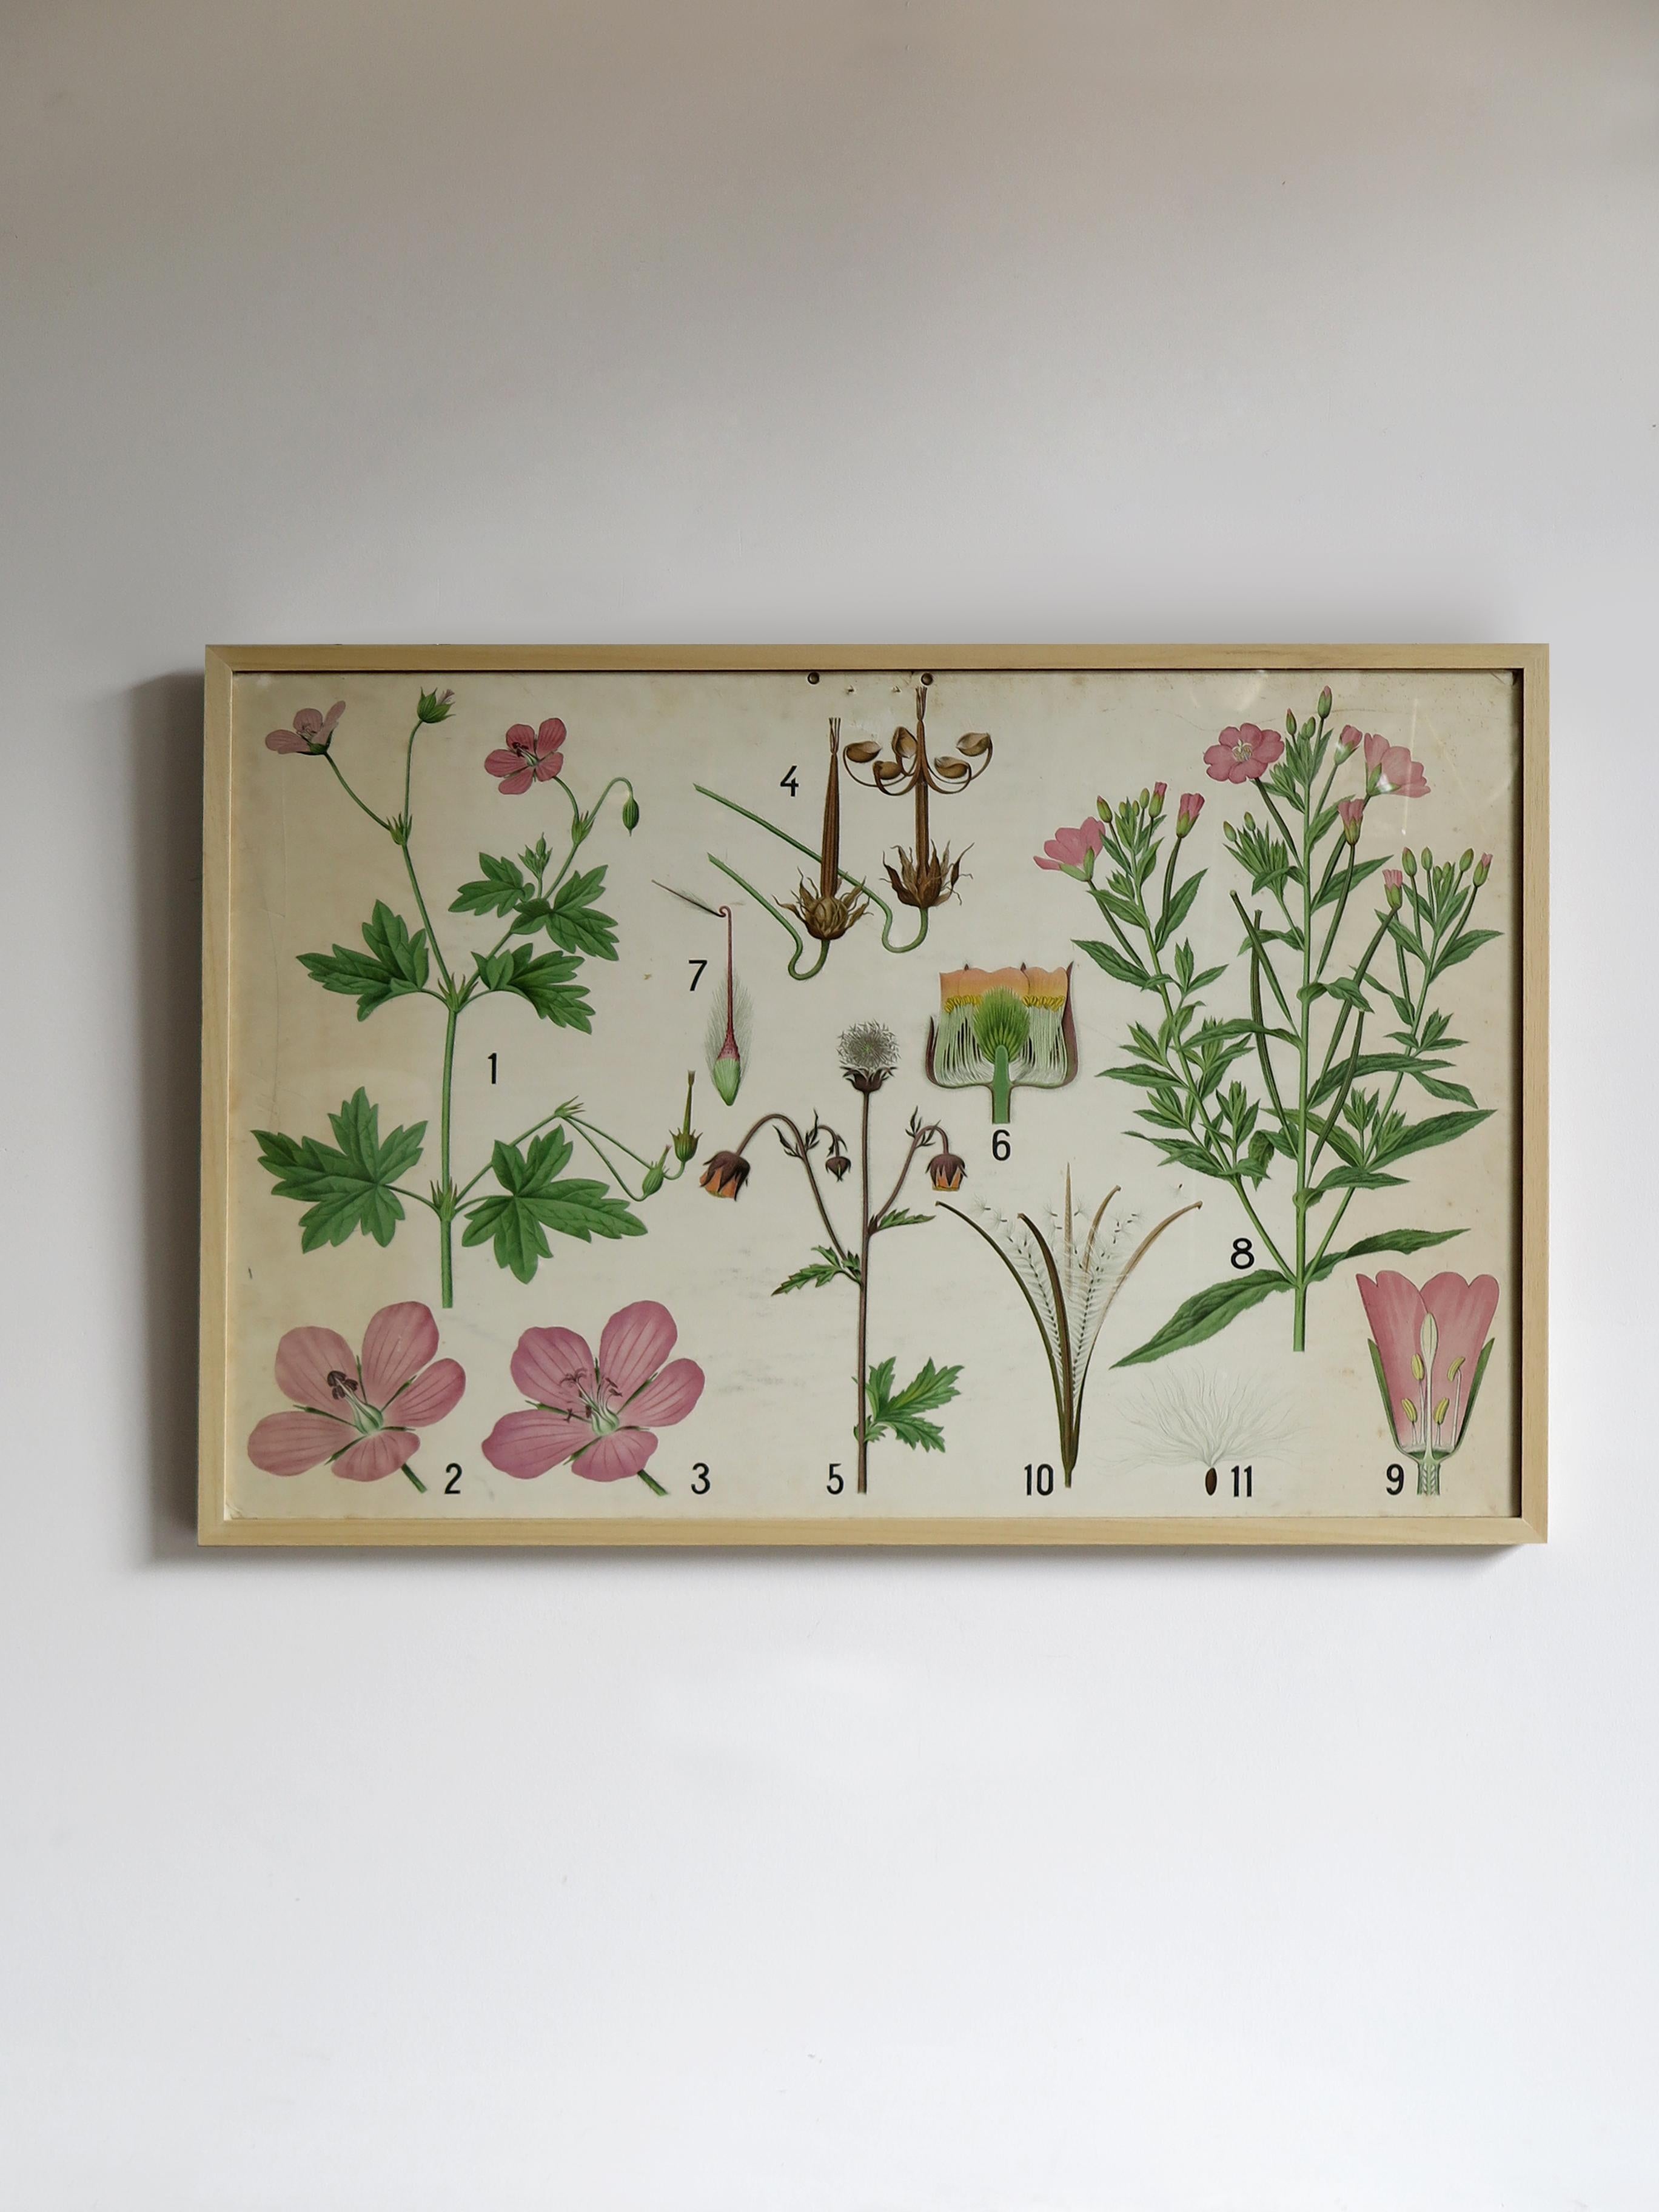 Scandinavian Mid-Century Modern design floral botanical illustrations picture on paper, from Denmark, 1950s.
New wood and glass frame.